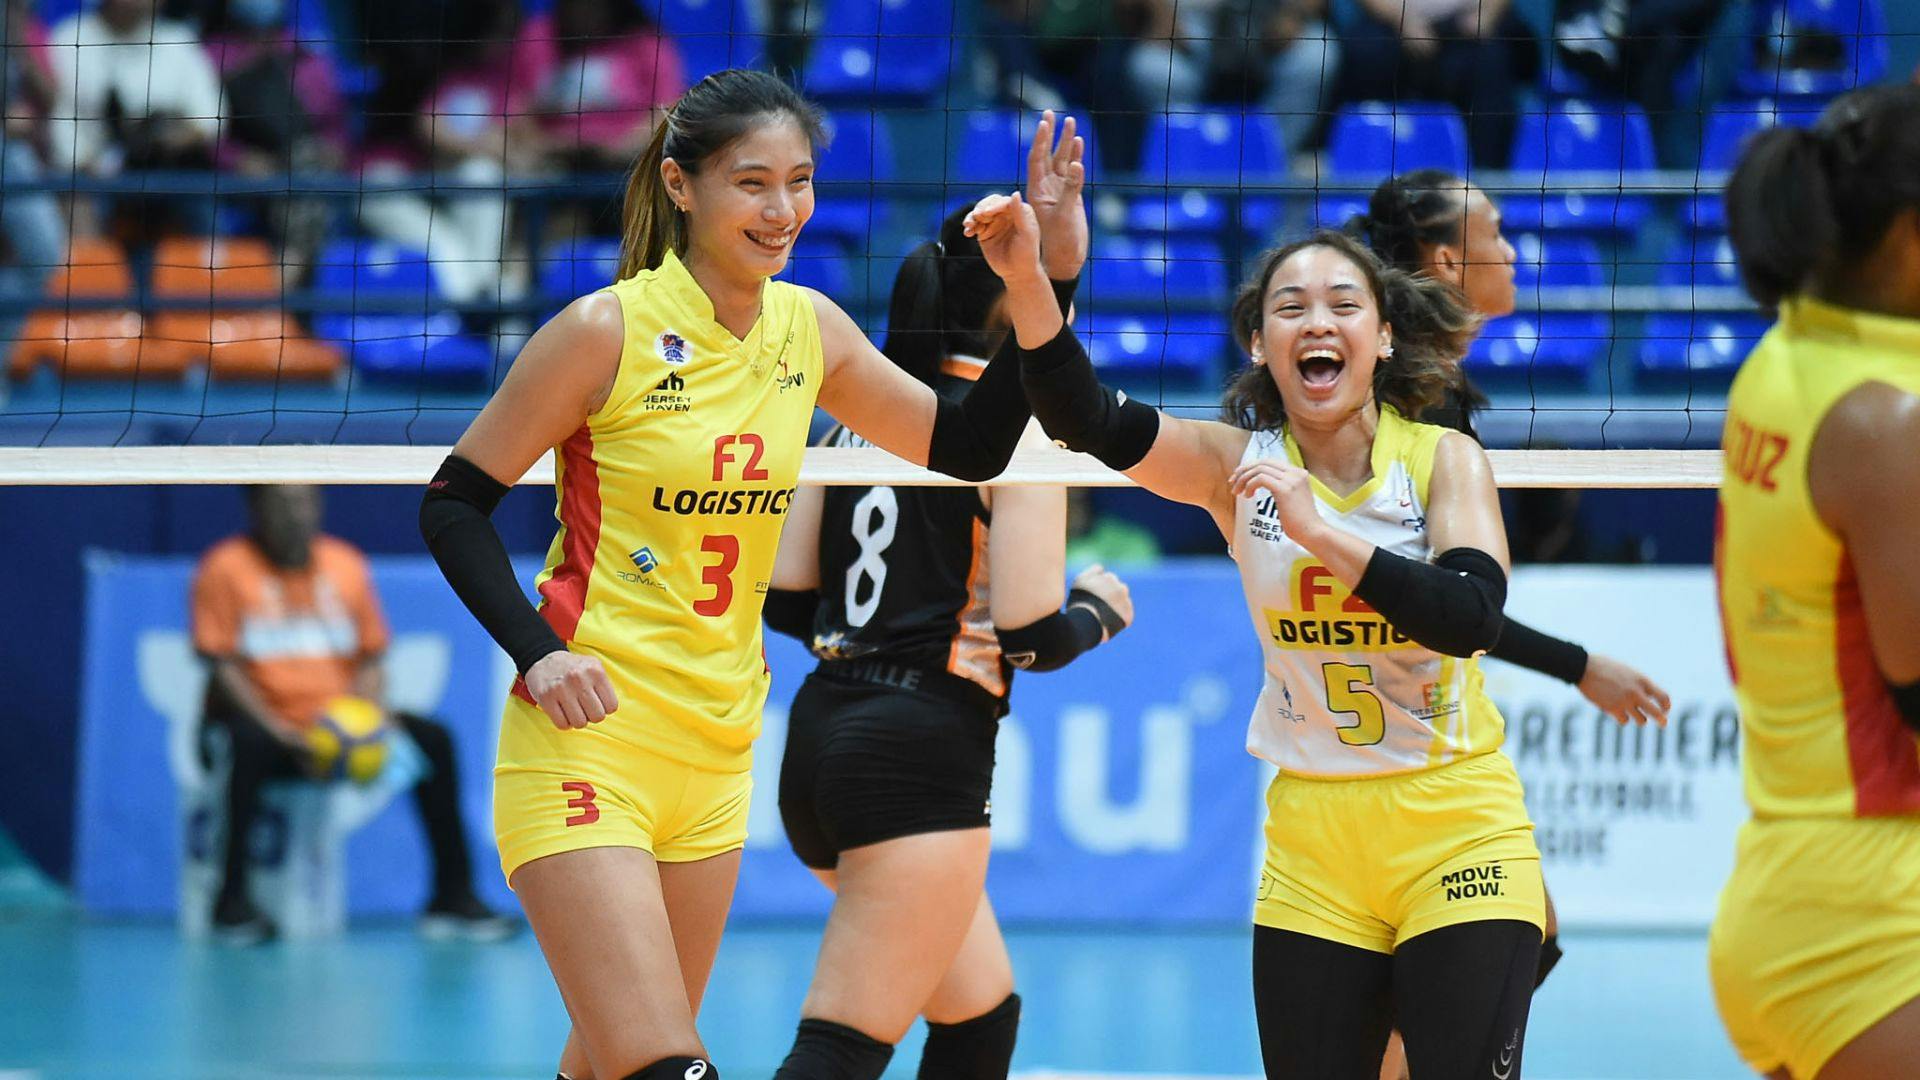 Ivy Lacsina flashes brilliance in new position as F2 Logistics grabs opening day win